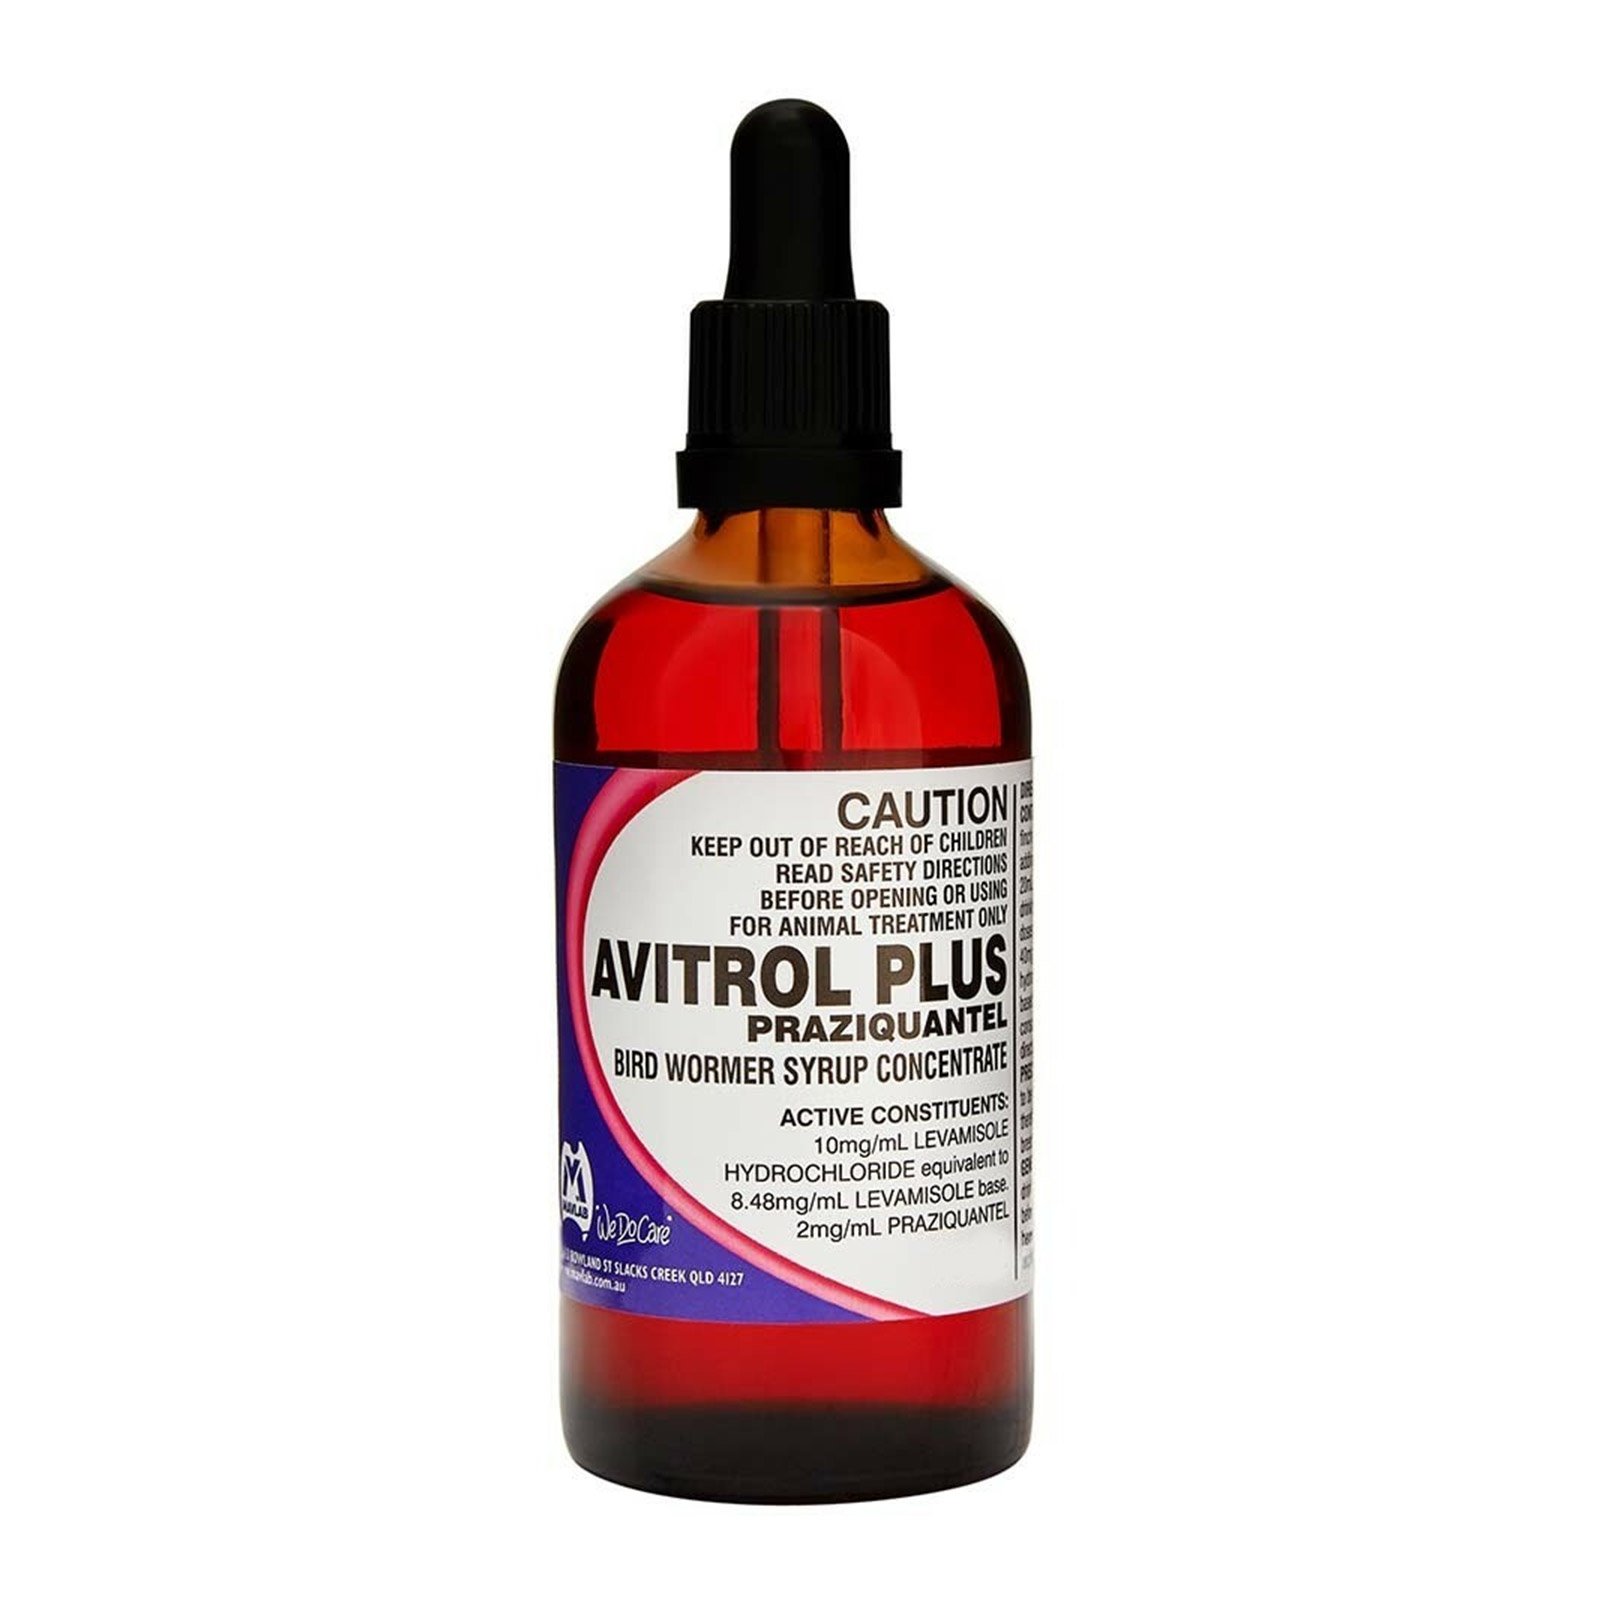 Avitrol Plus Wormer Syrup Concentrate for Birds